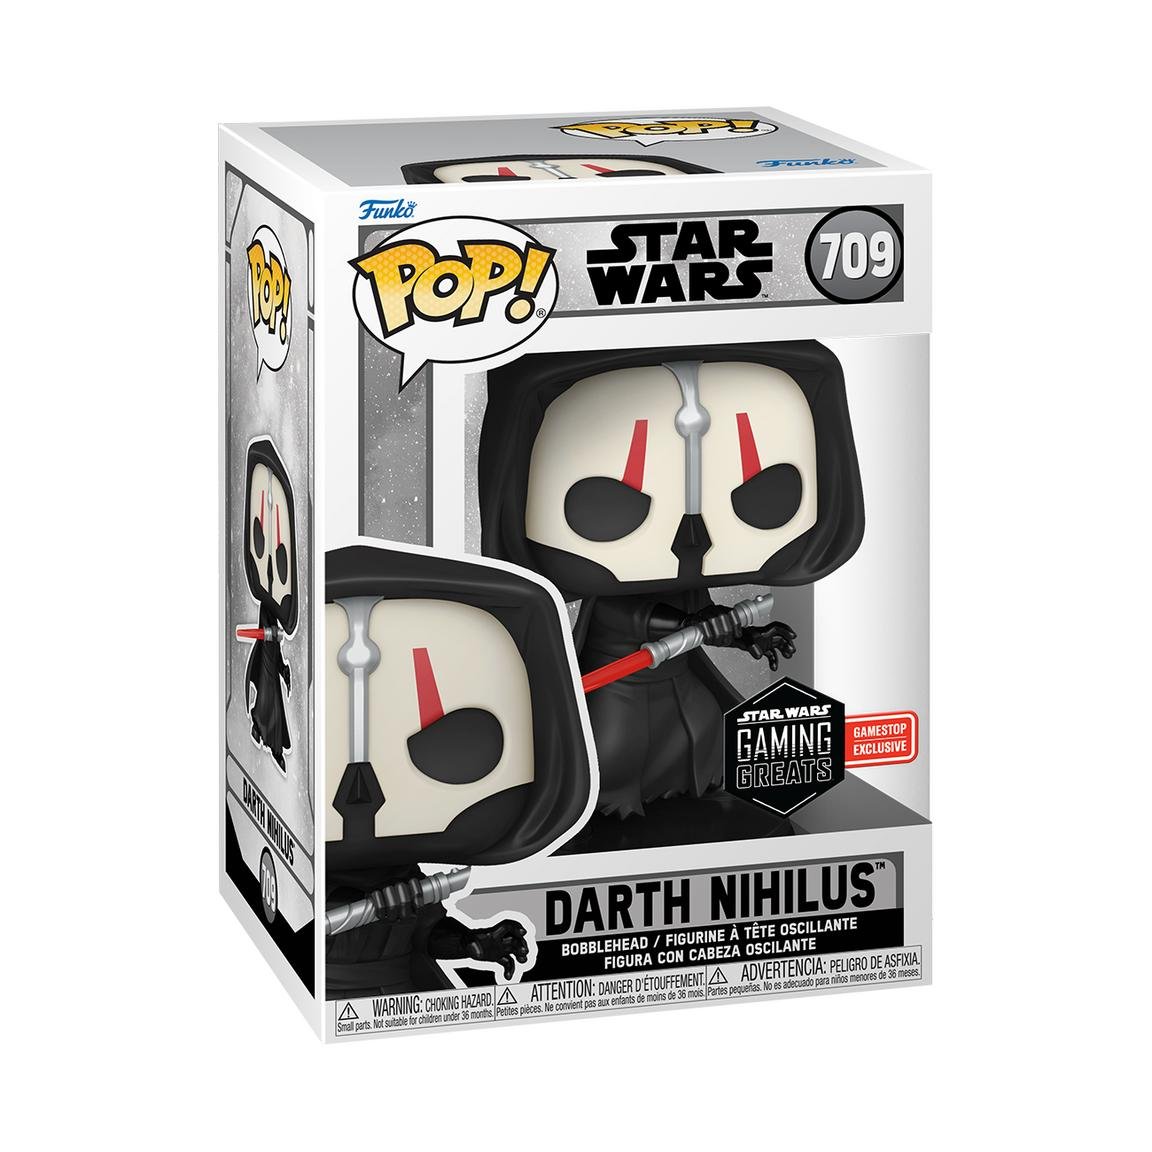 🚨 The KOTOR II Funko Pop Collector Box has been announced!

It comes with Darth Nihilus, Darth Sion, metal buttons of them both, a Kreia lanyard and patch.

You can pre-order it from GameStop in the US and other Funko retailers elsewhere.